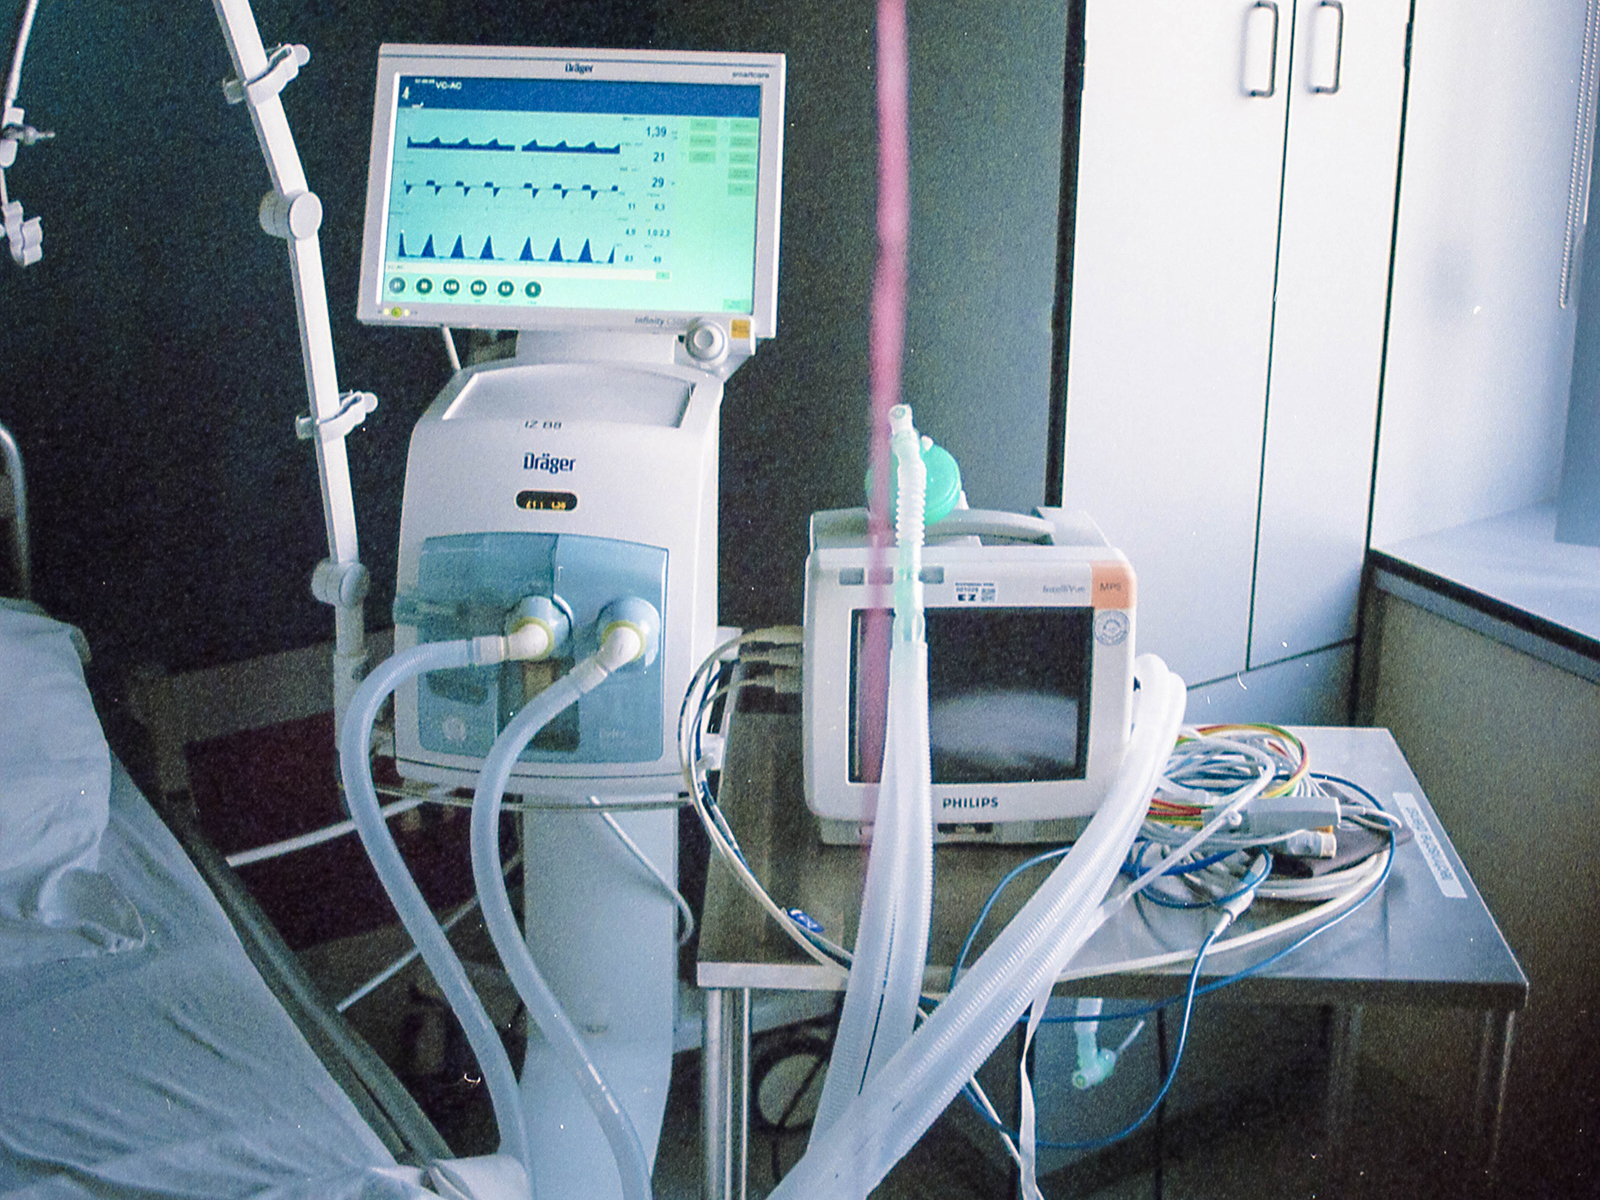 Hospital Grade Power Cords for High-Stakes Healthcare Settings